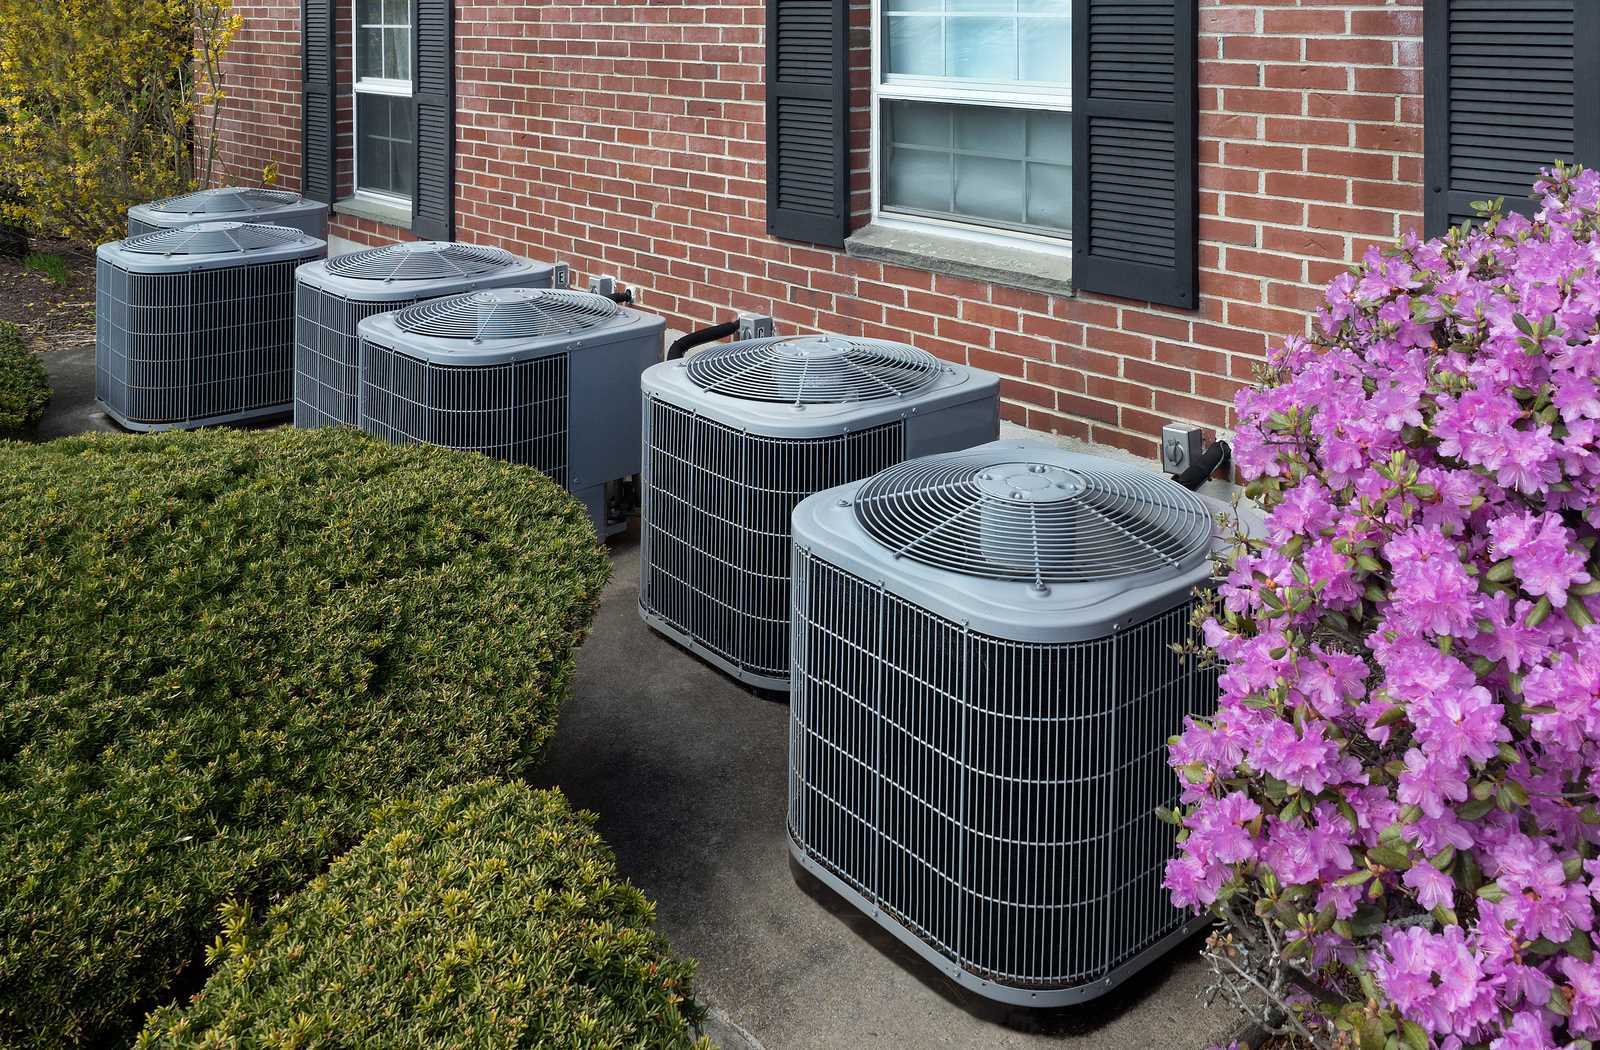 Air conditioning compressors beside garden with purple flowers